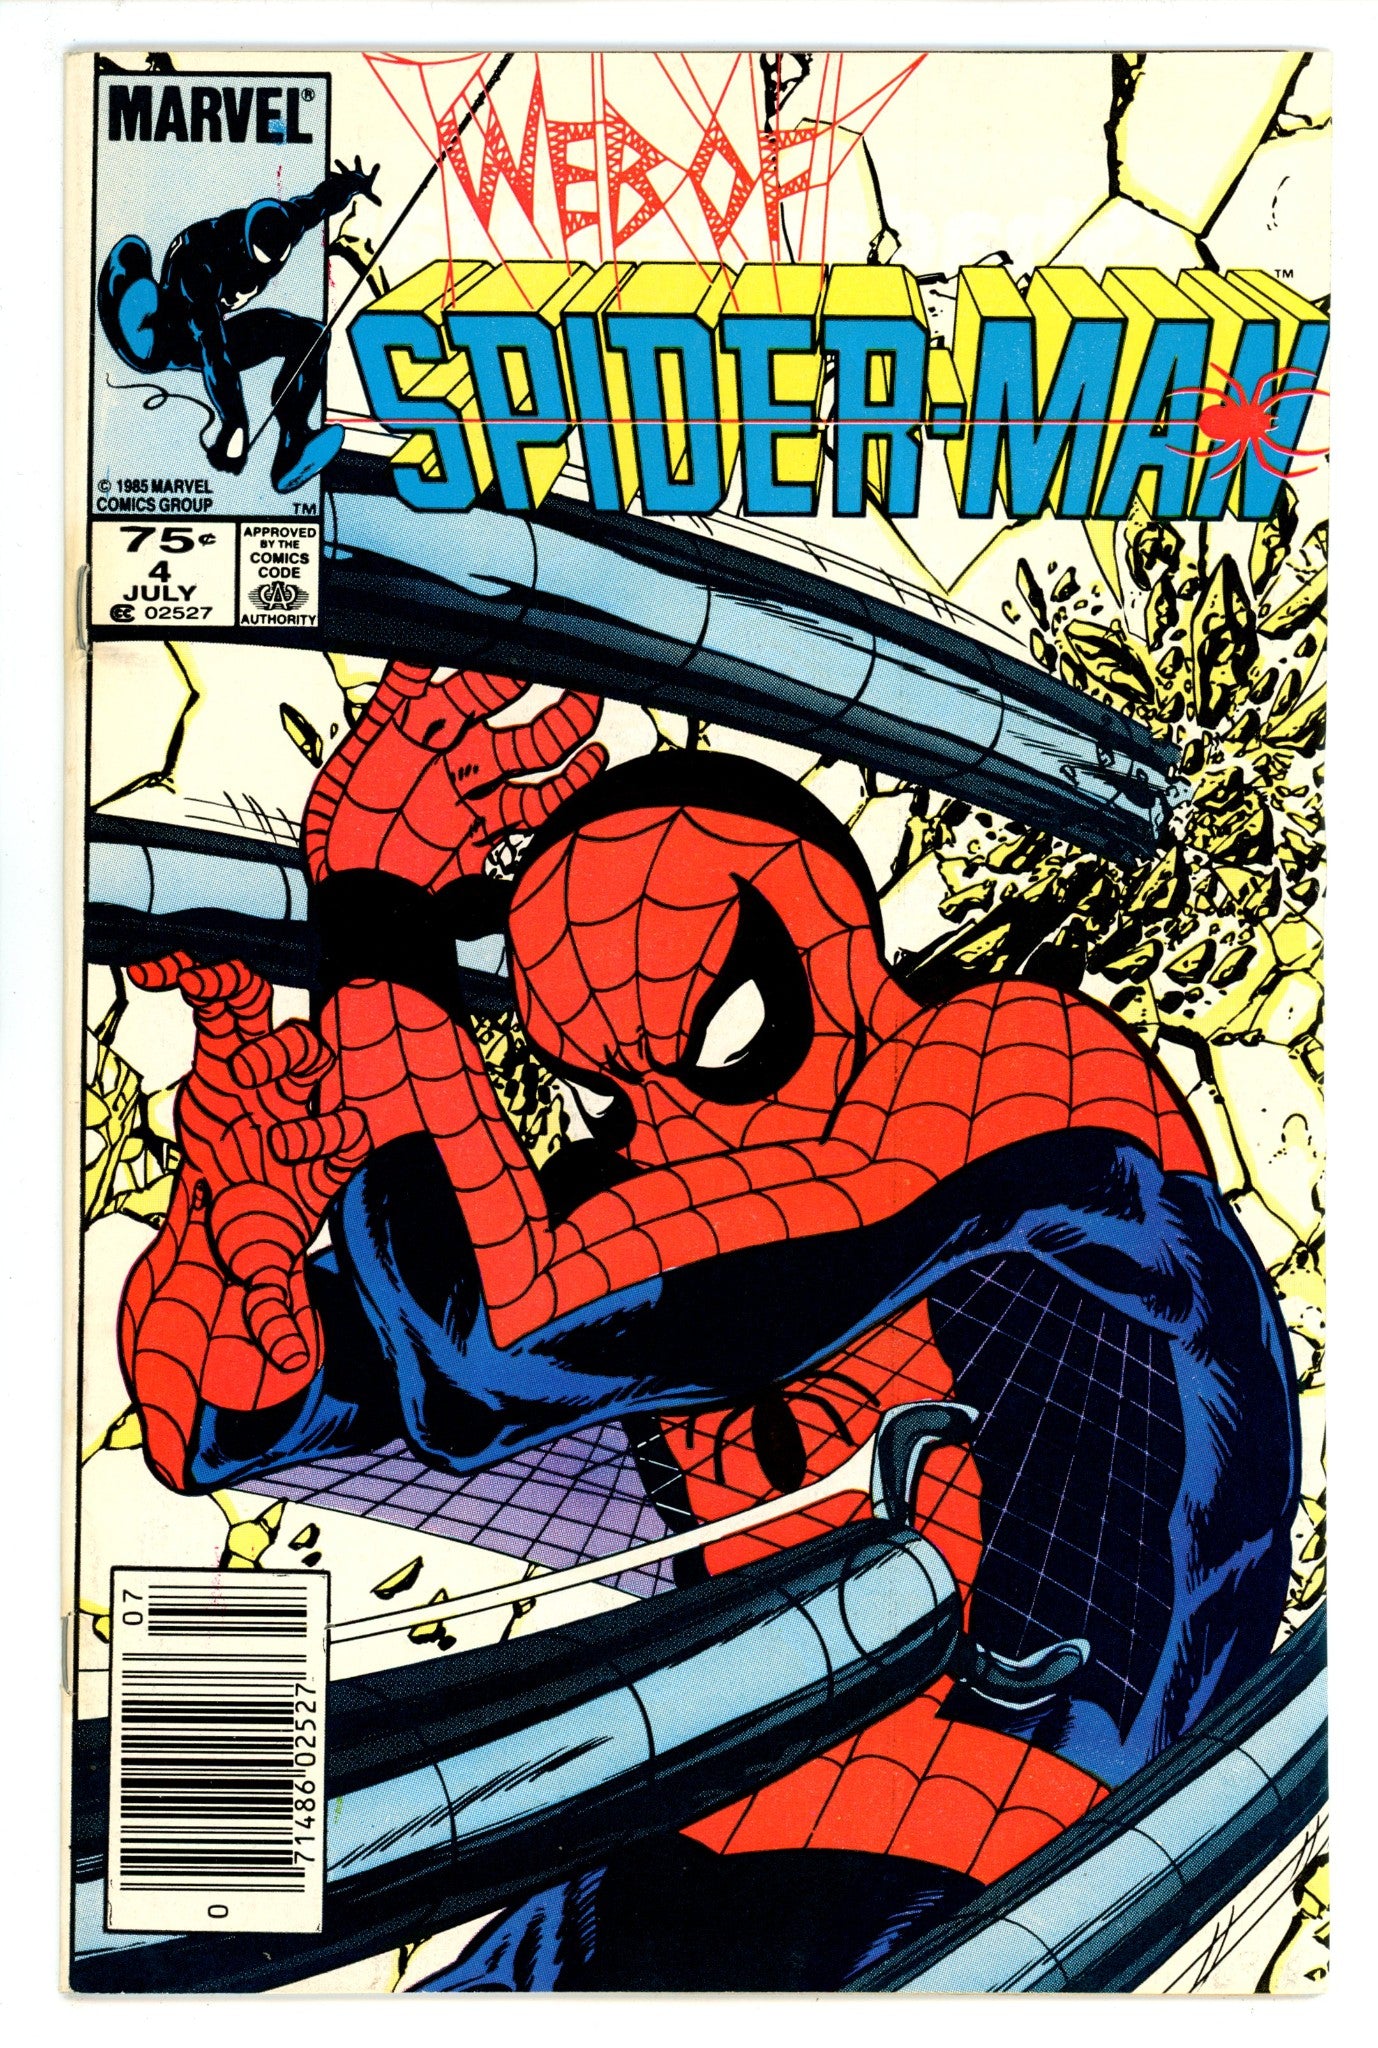 Web of Spider-Man Vol 1 4 FN- (5.5) (1985) Canadian Price Variant 